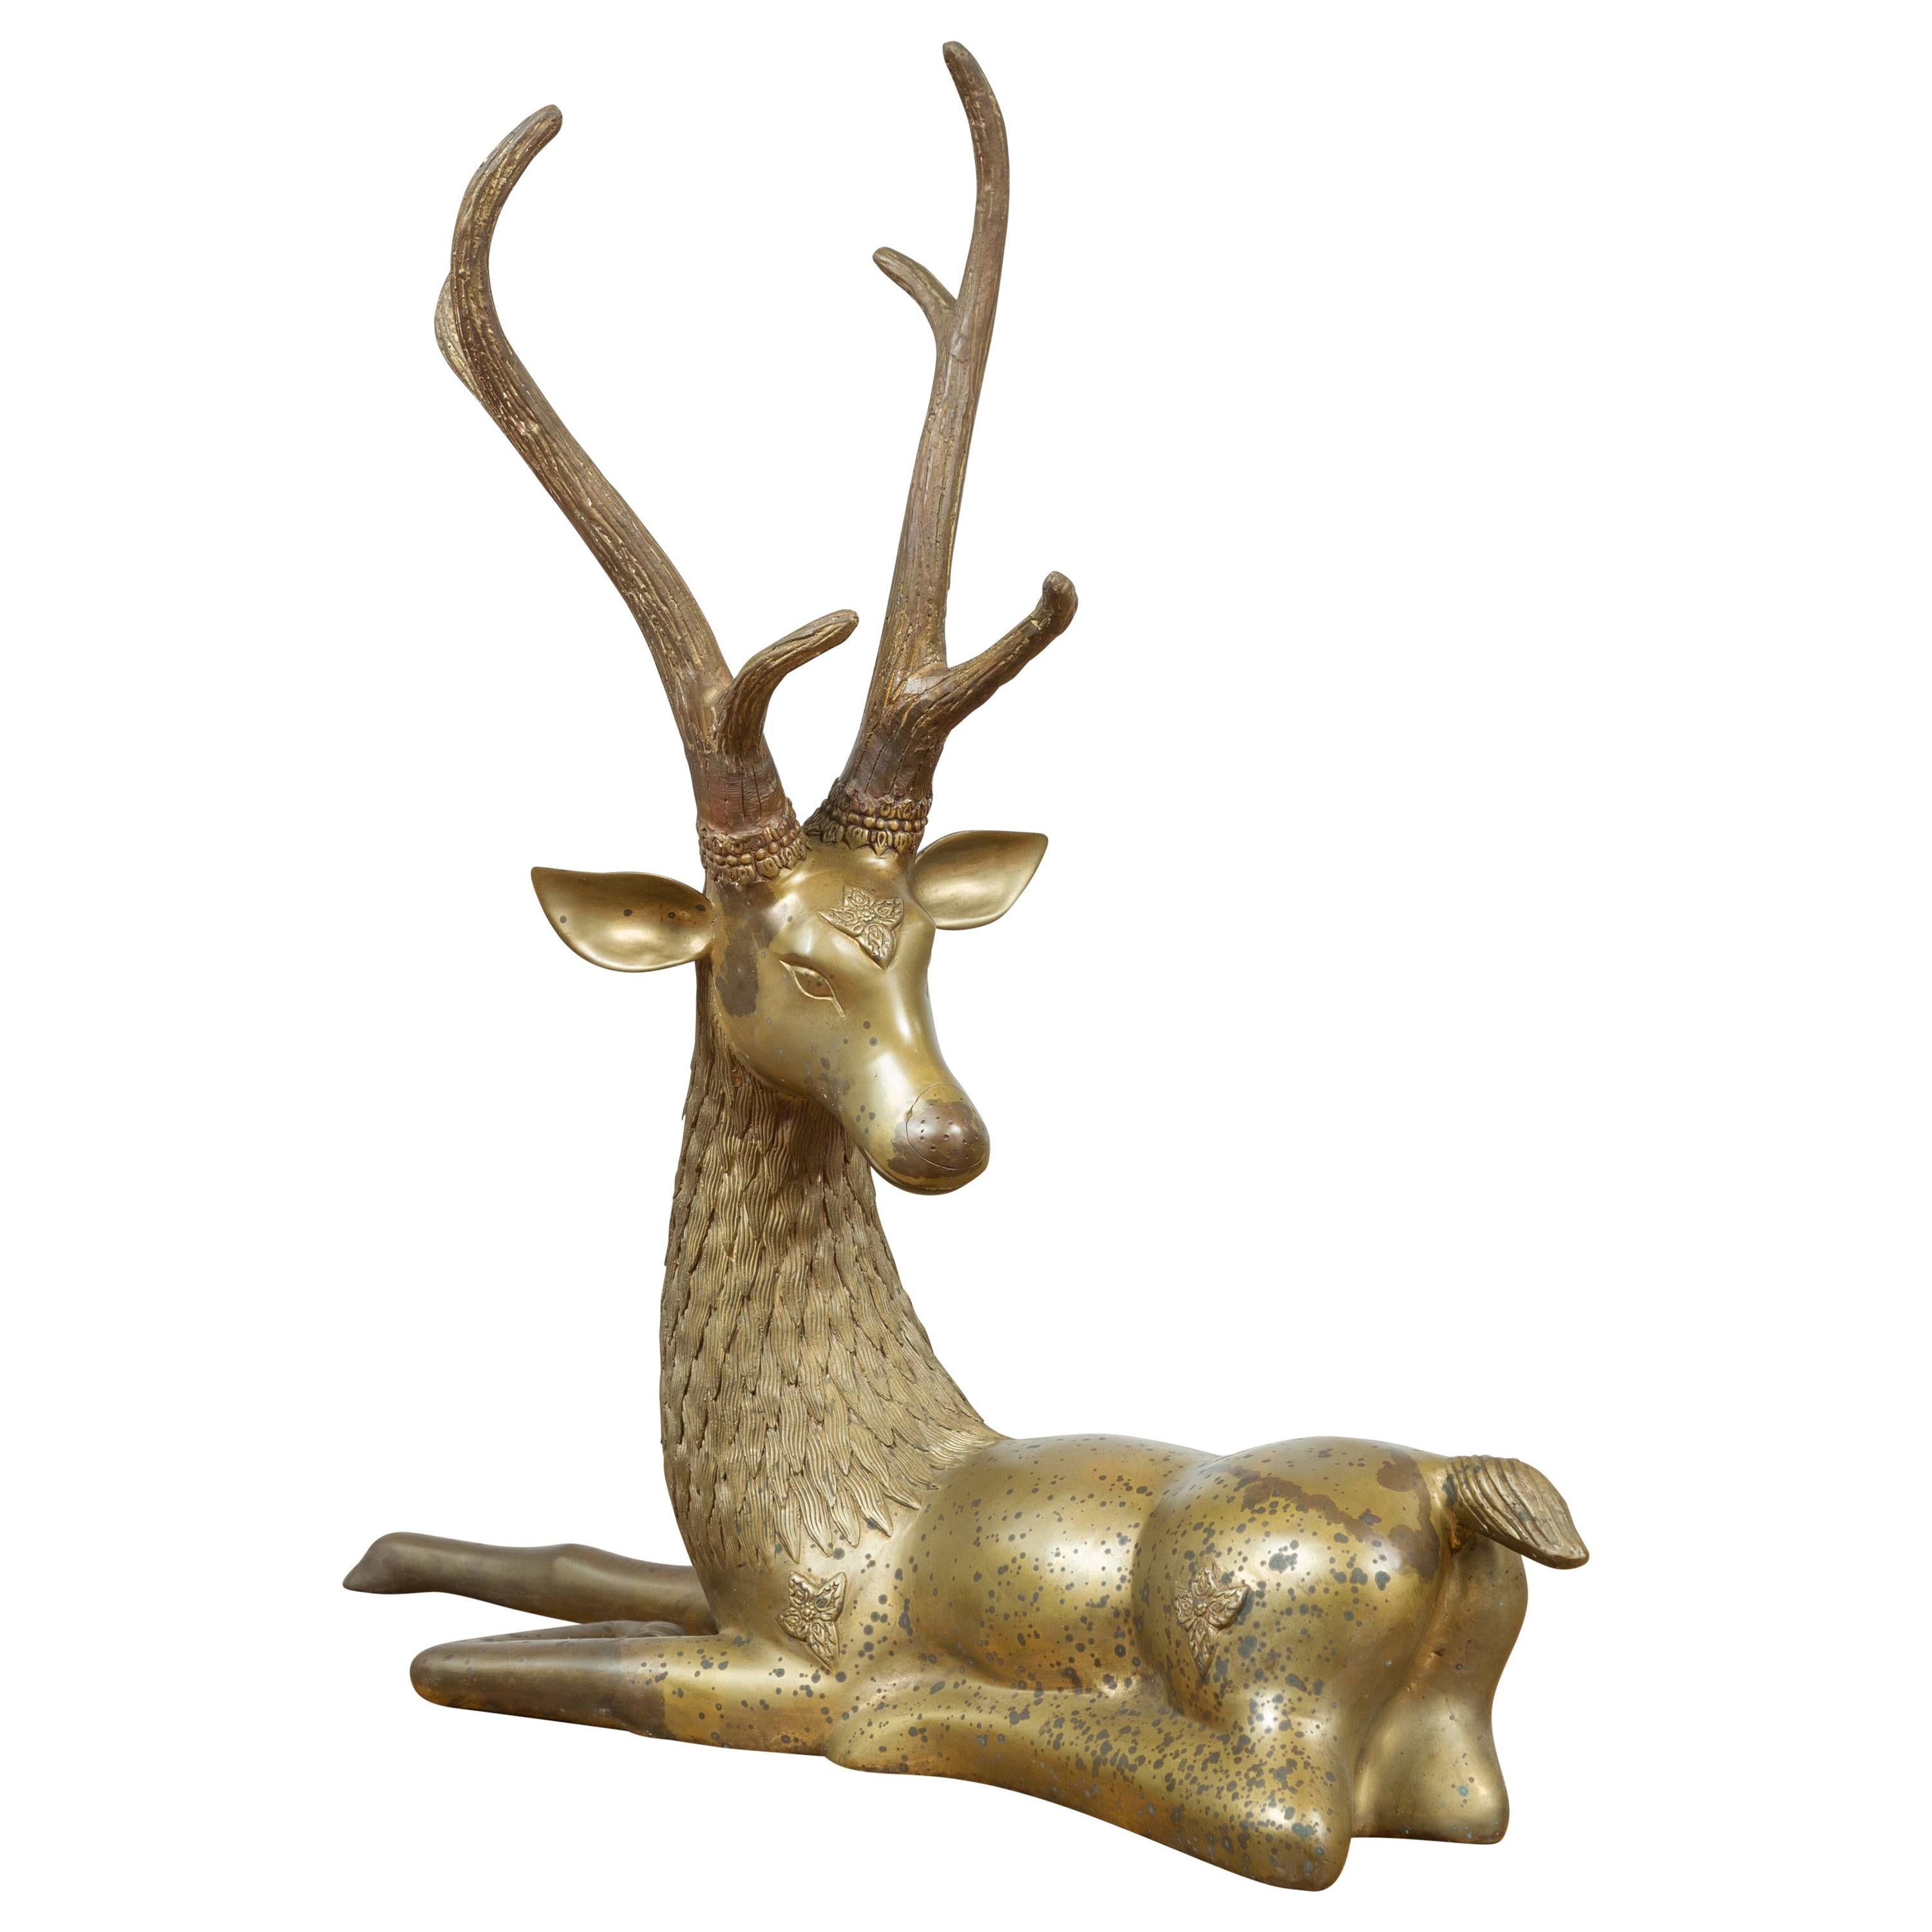 Contemporary Bronze Reclining Deer Statue with Golden Patina and Large Antlers